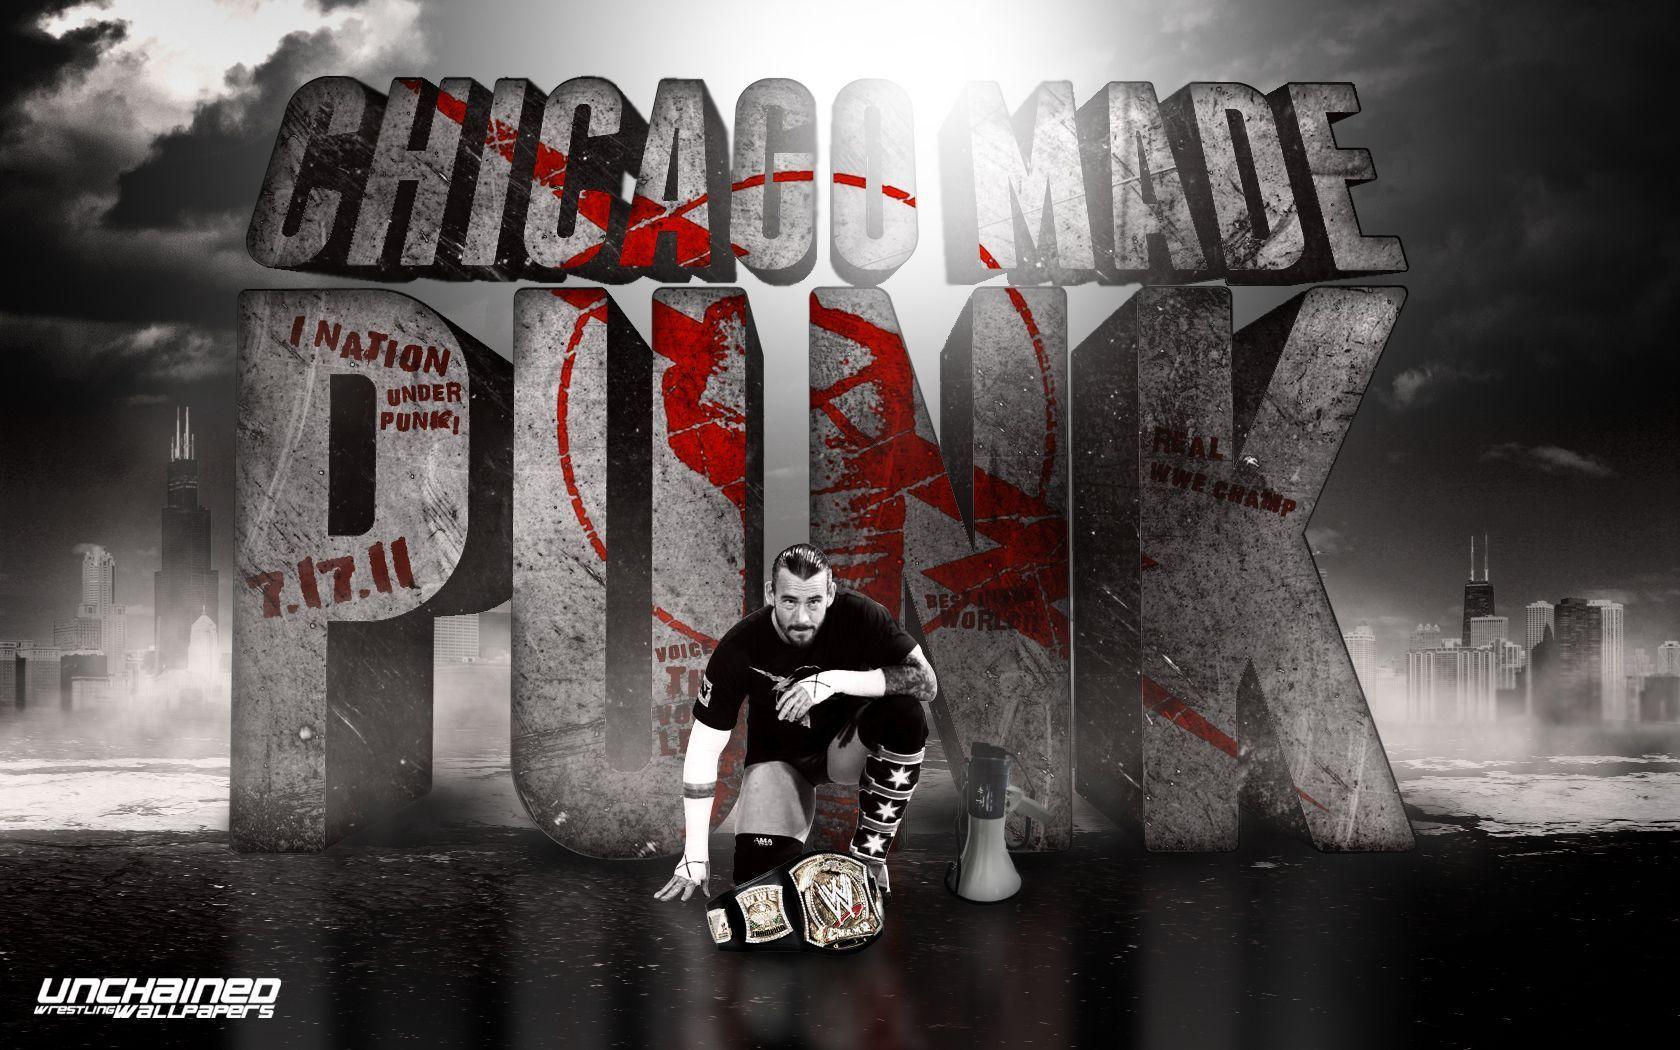 WWE CM Punk "Chicago Made Punk" Wallpaper Unchained WWE.com